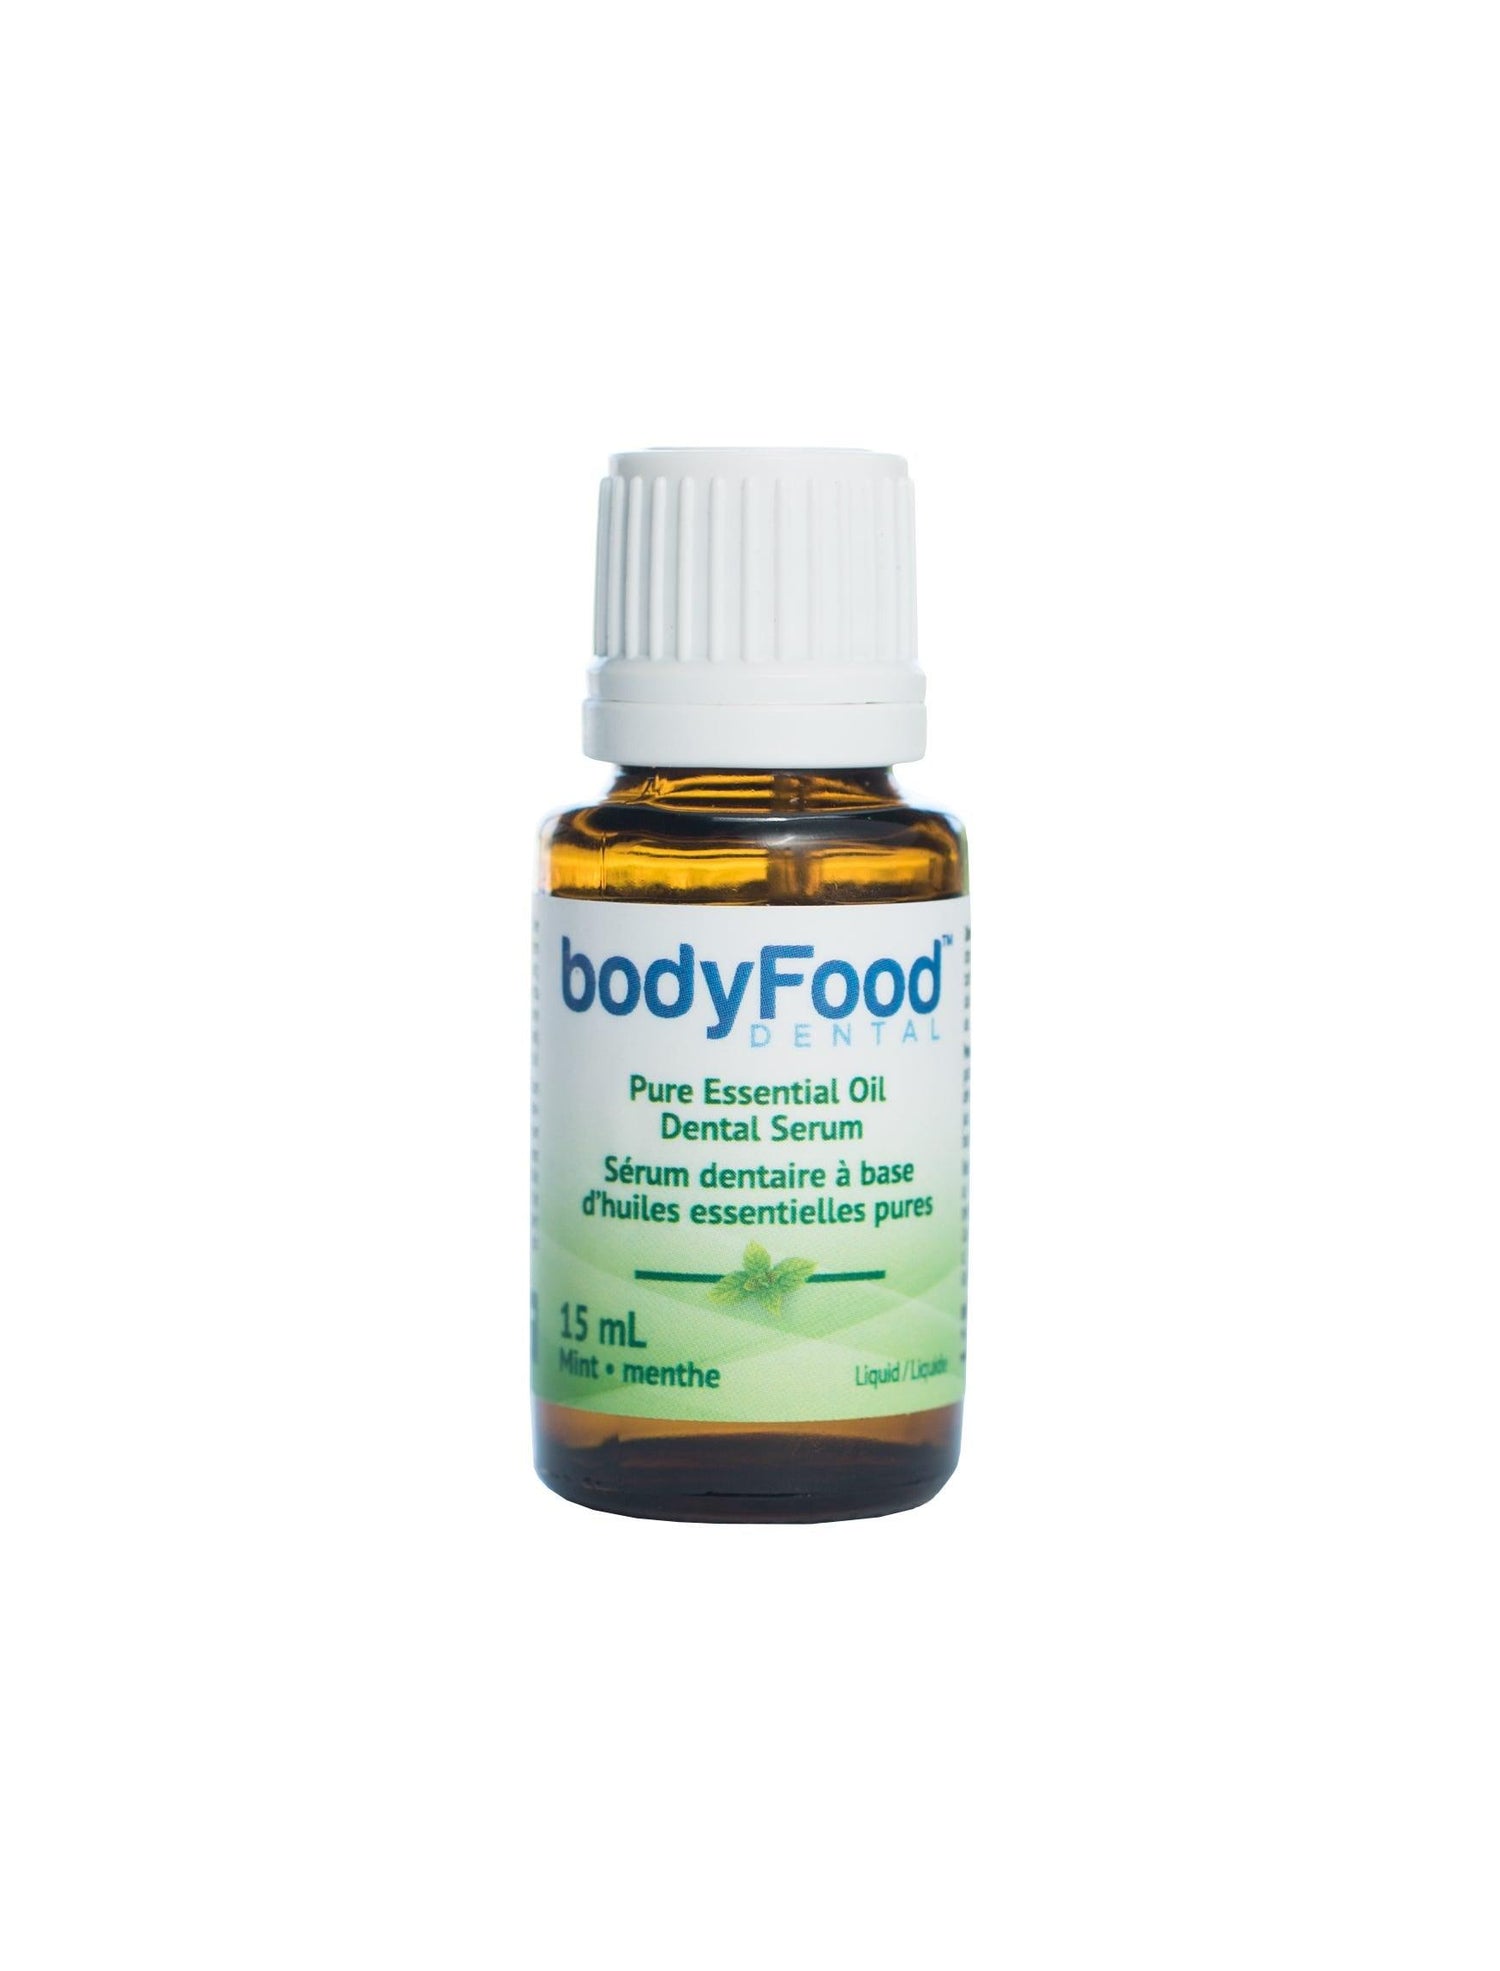 BodyFood Dental Products Online